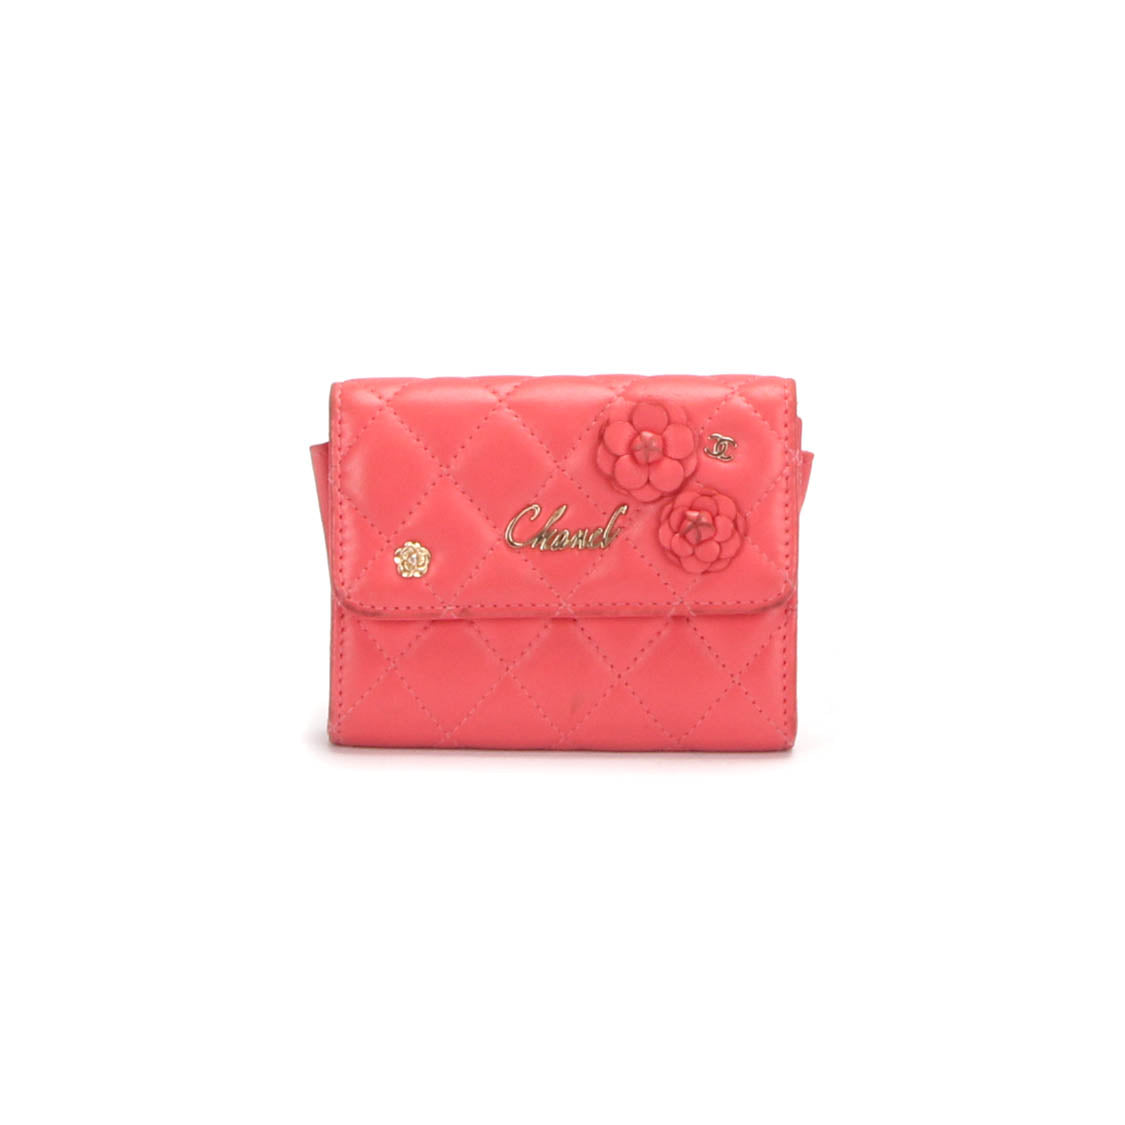 Camellia Leather Small Wallet